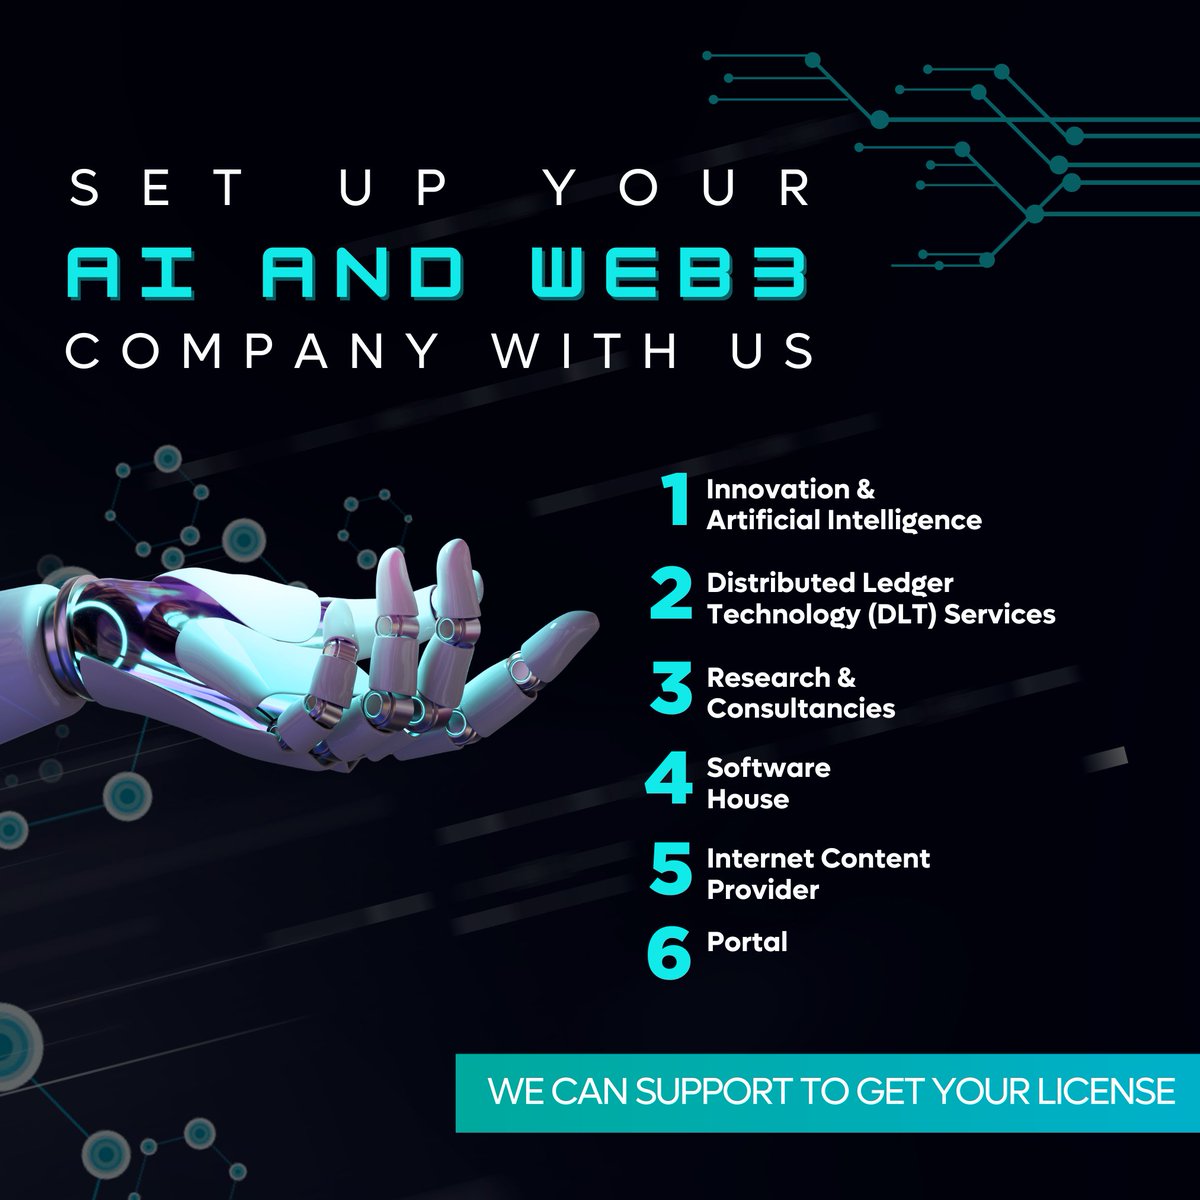 Ready to setup your company? Get in touch with us to find out more and how we can help you! 

#CryptoOasis #Web3 #Blockchain #Metaverse #NFT #DLT #companysetup #AI